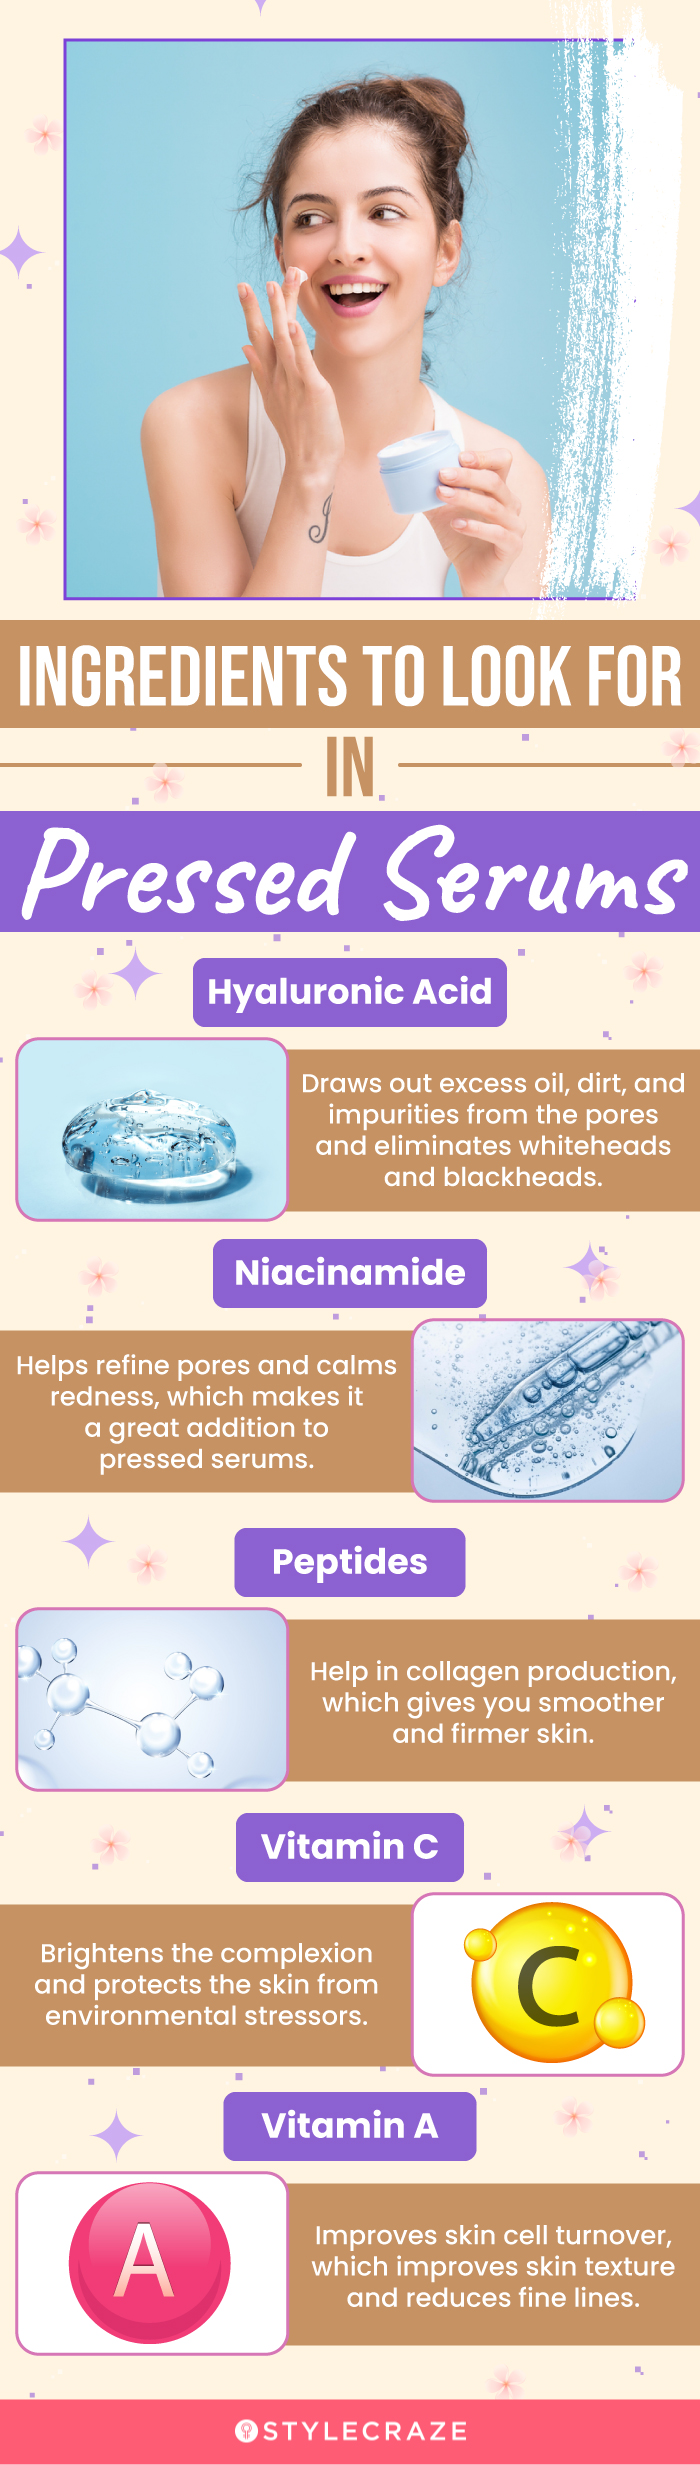 Ingredients To Look For In Pressed Serums(infographic)